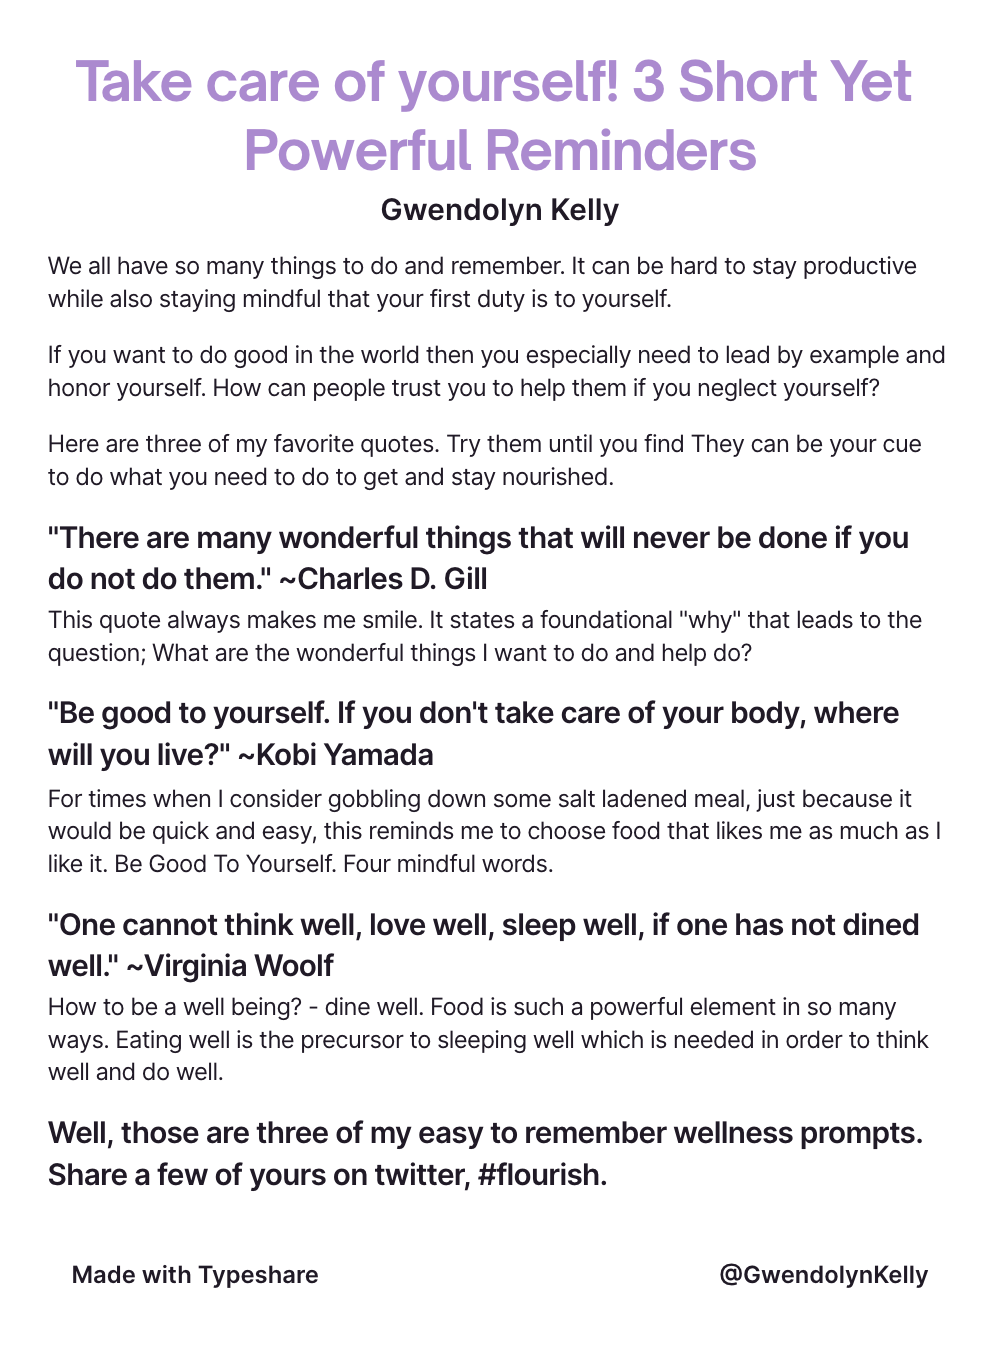 Take care of yourself! 3 short powerful reminders * Gwendolyn Kelly